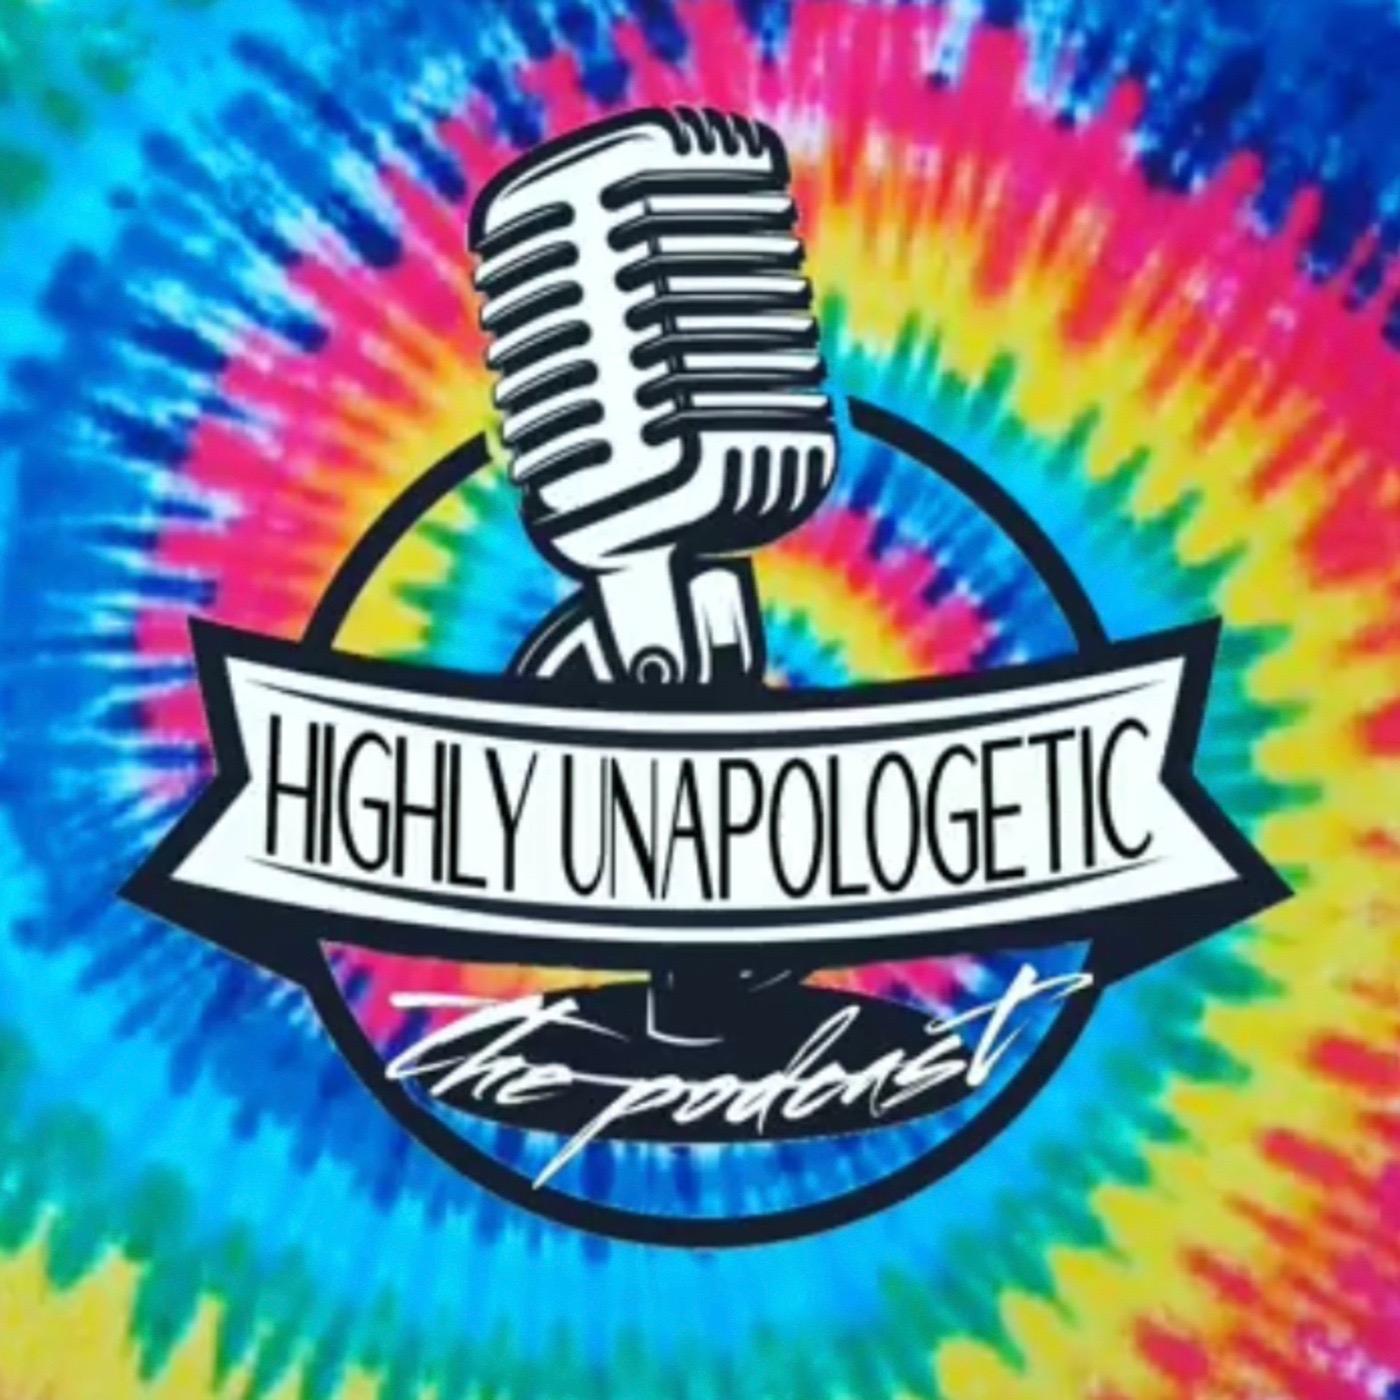 Highly Unapologetic: The Podcast